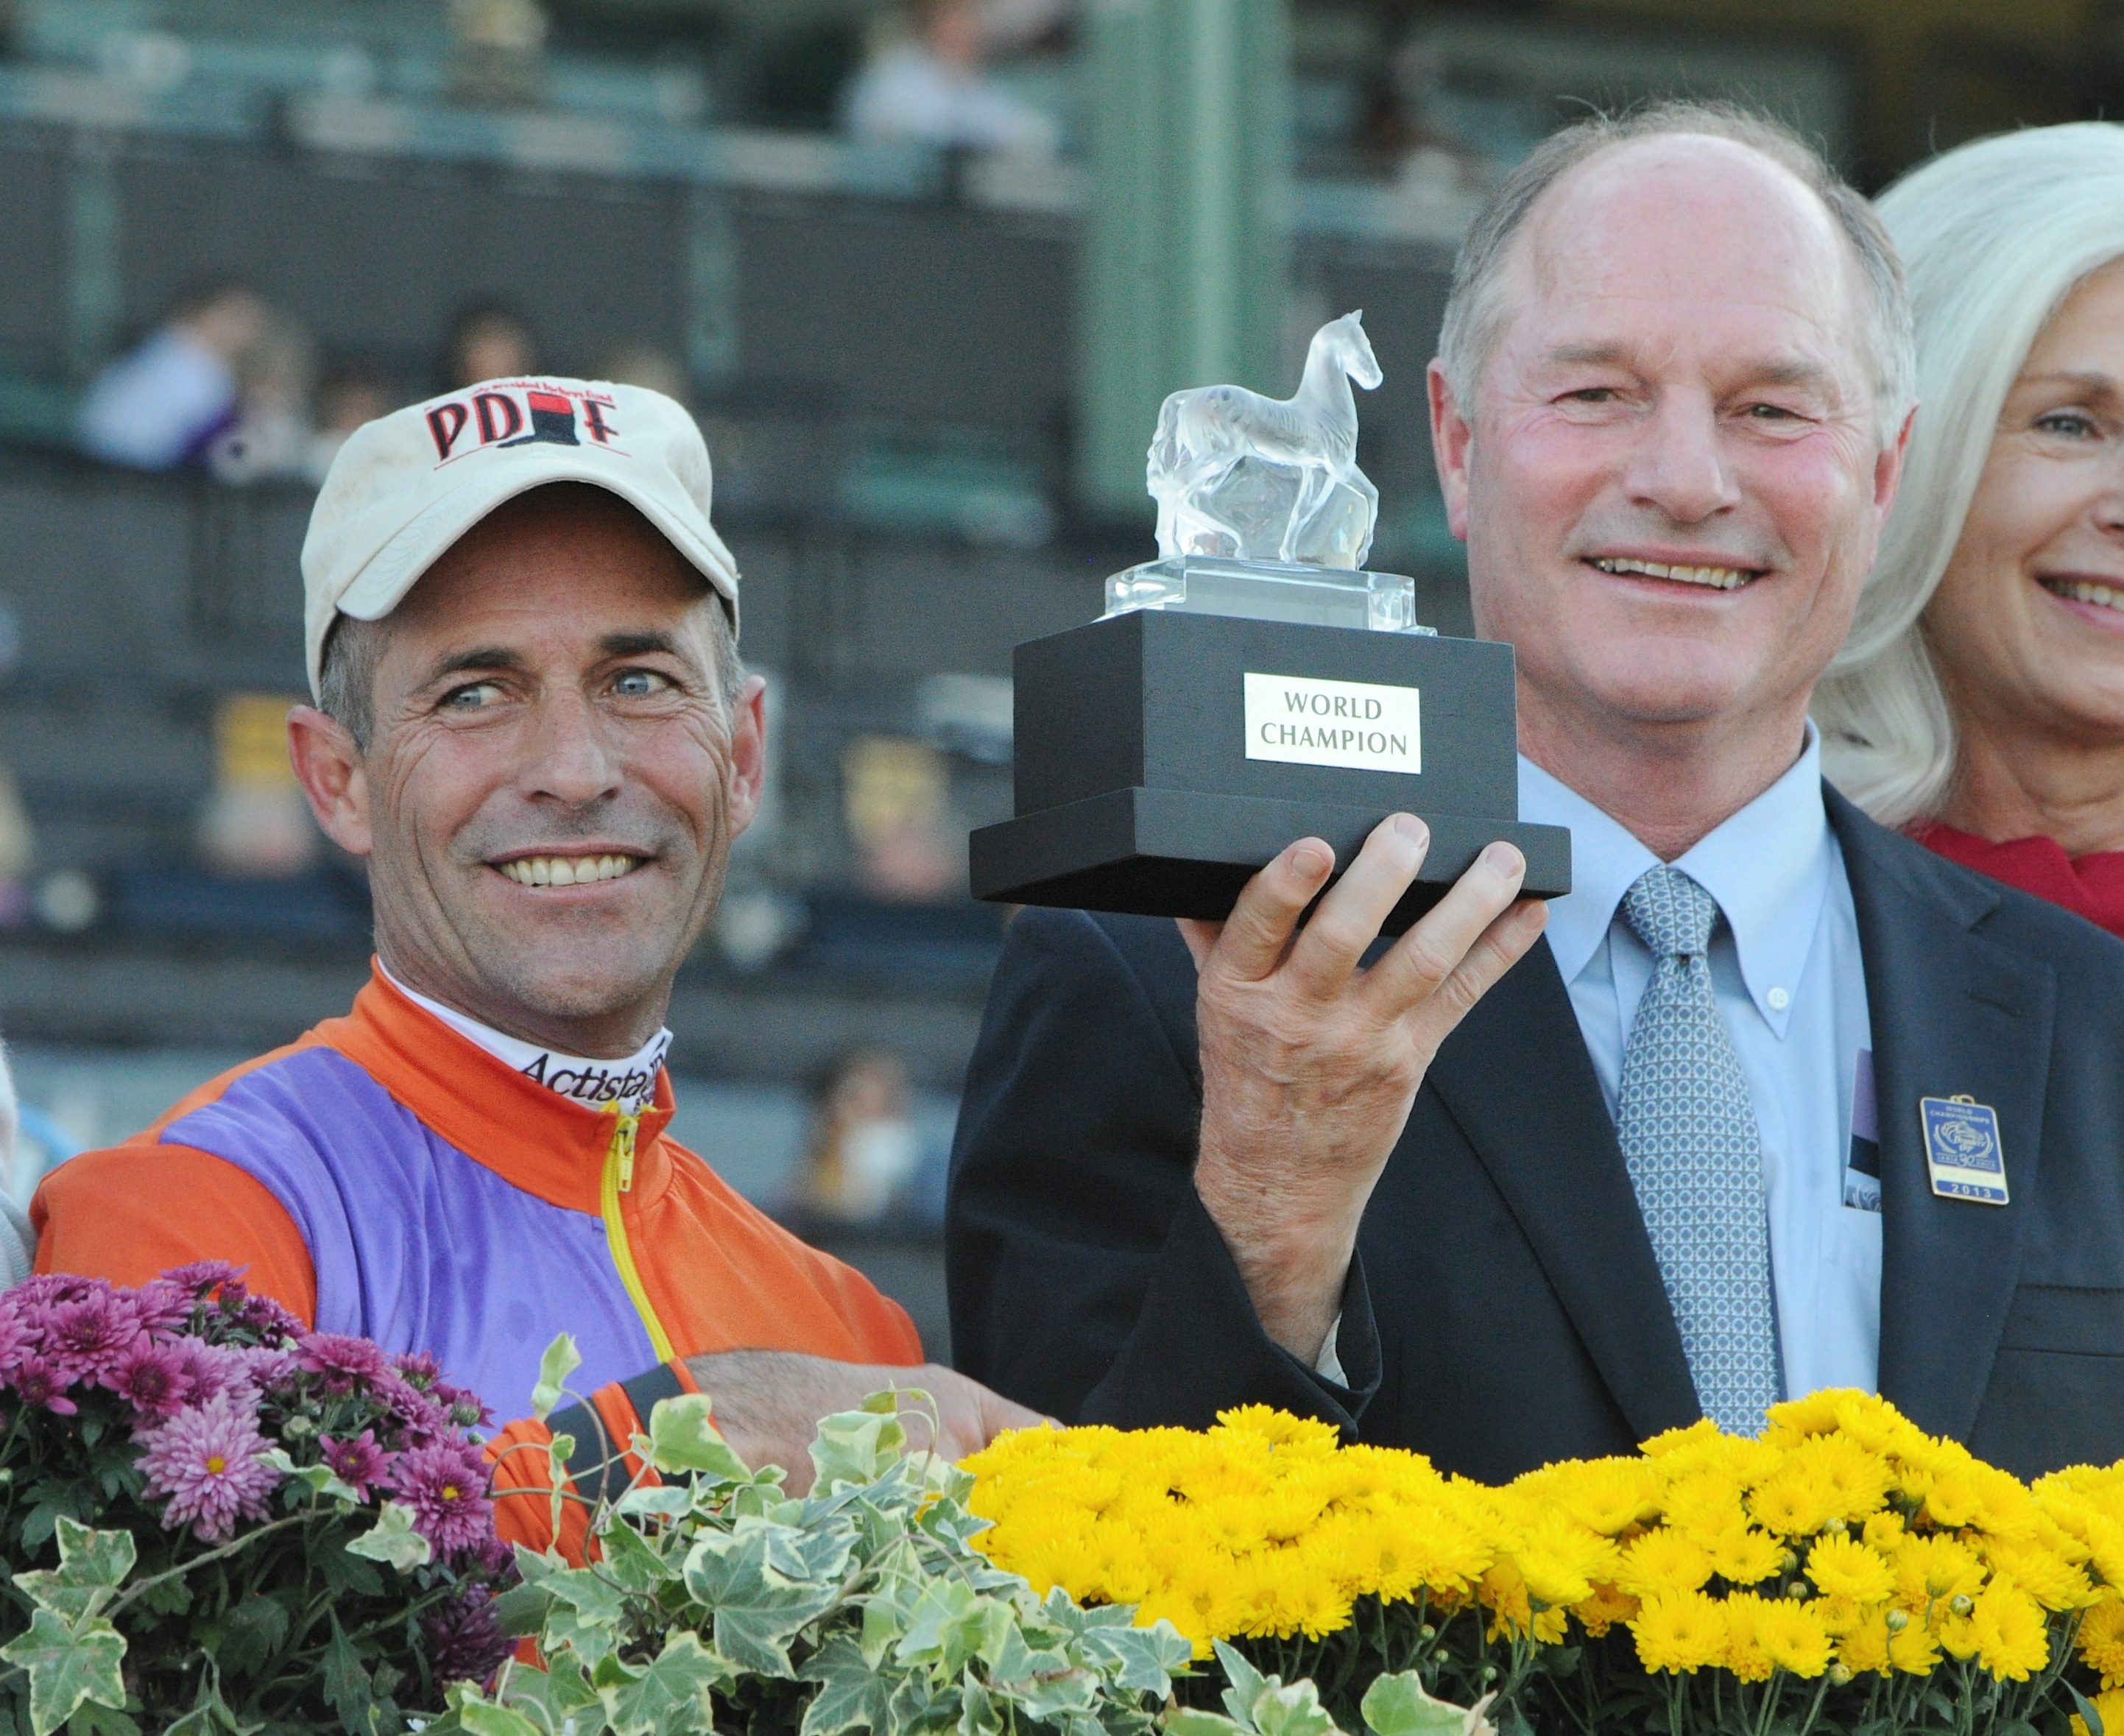 Richard Mandella, right, celebrates with Gary Stevens after Beholder won the 2013 Breeders' Cup Distaff at Santa Anita (Bob Mayberger/Museum Collection)